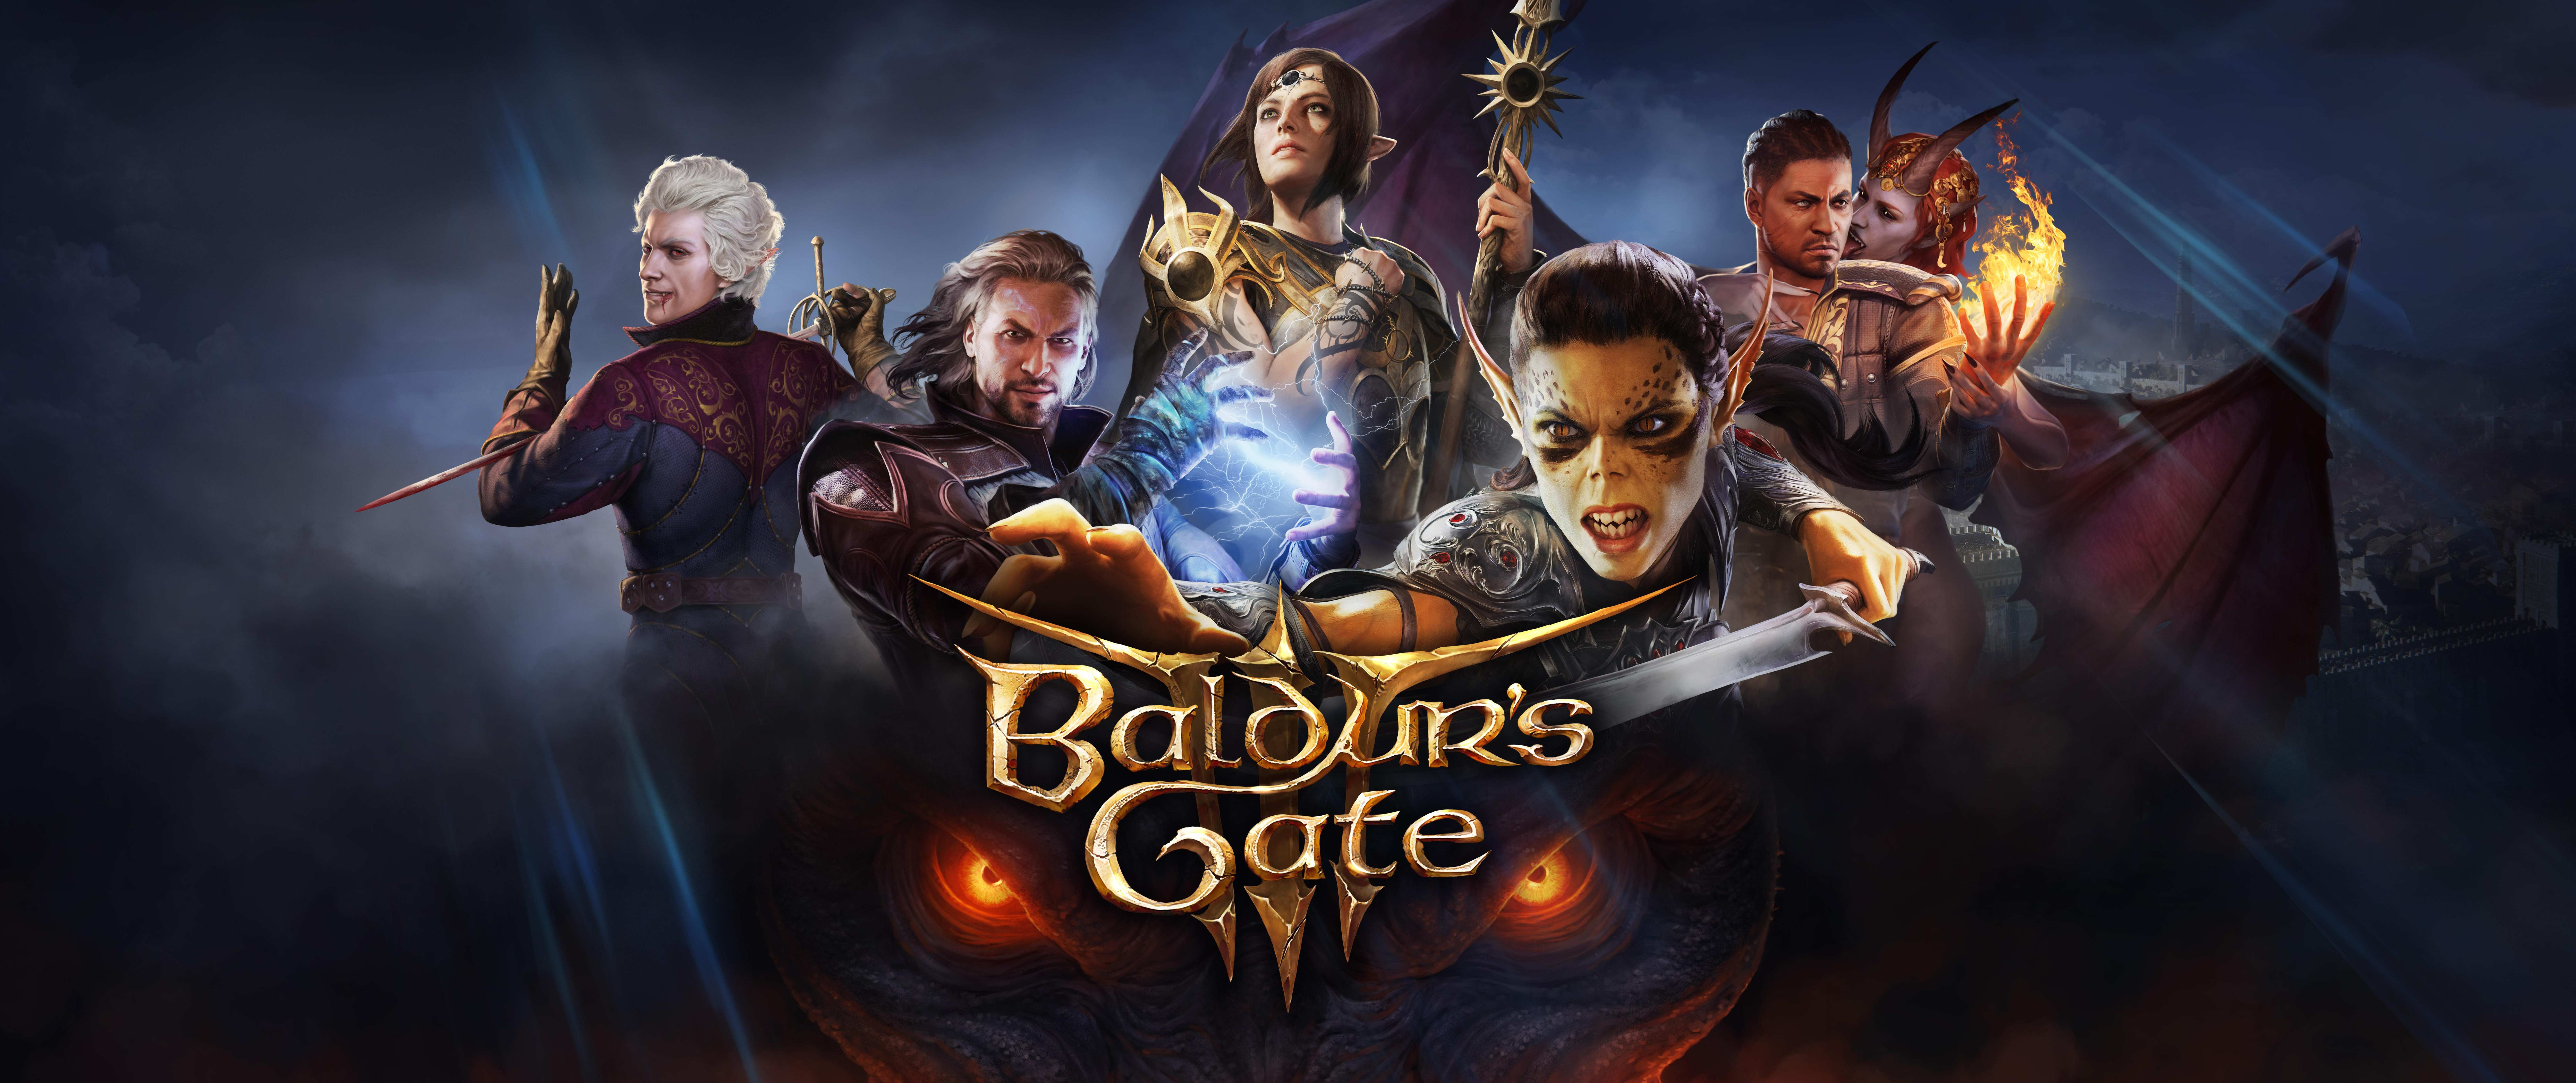 50 Baldurs Gate 3 HD Wallpapers and Backgrounds